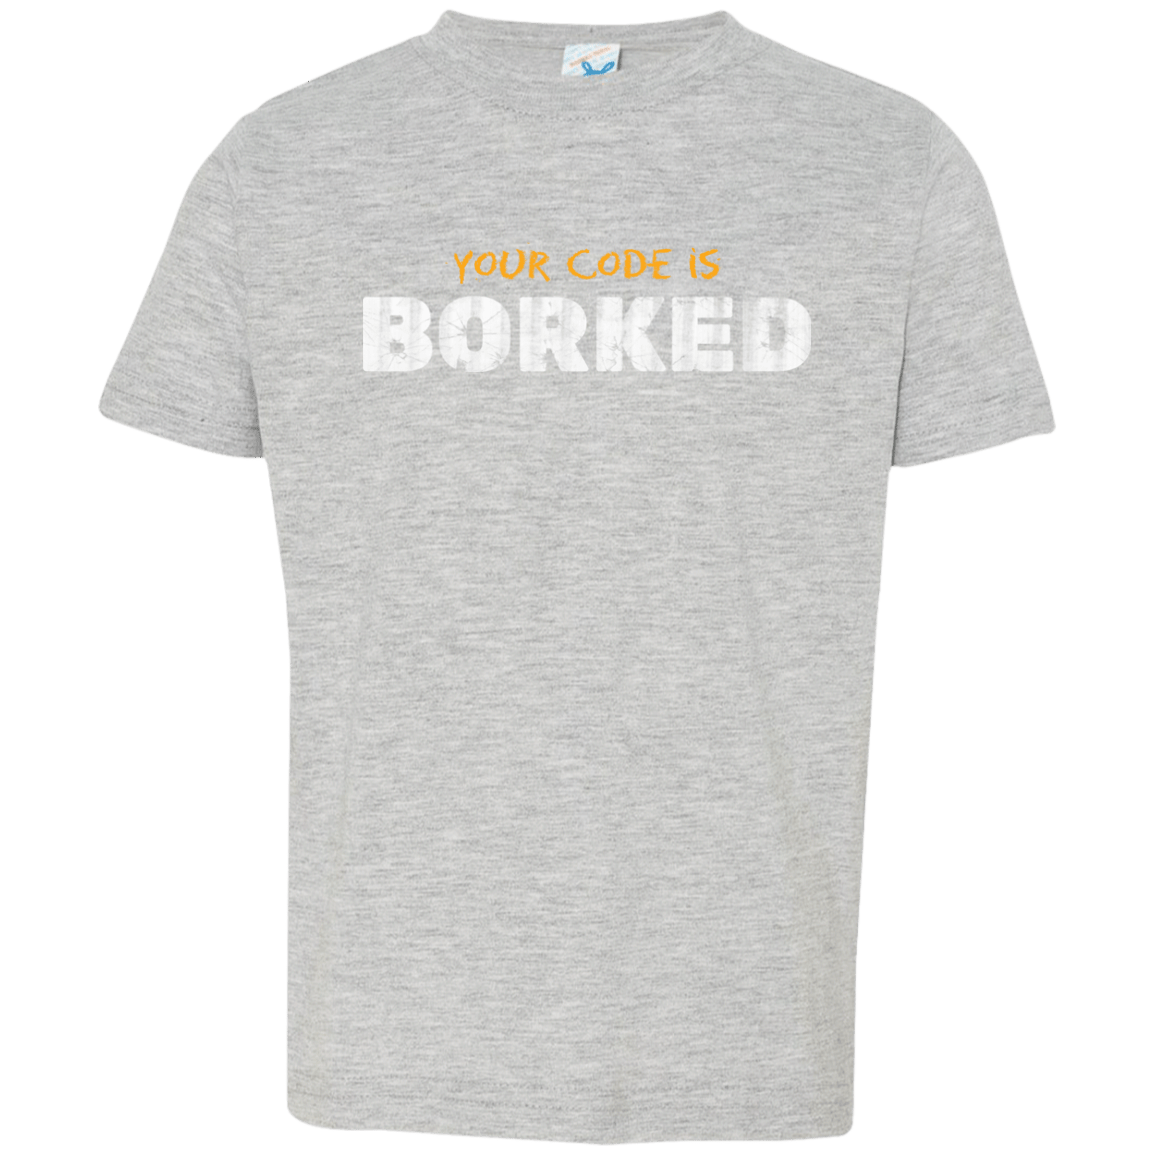 T-Shirts Heather Grey / 2T Your Code Is Borked Toddler Premium T-Shirt